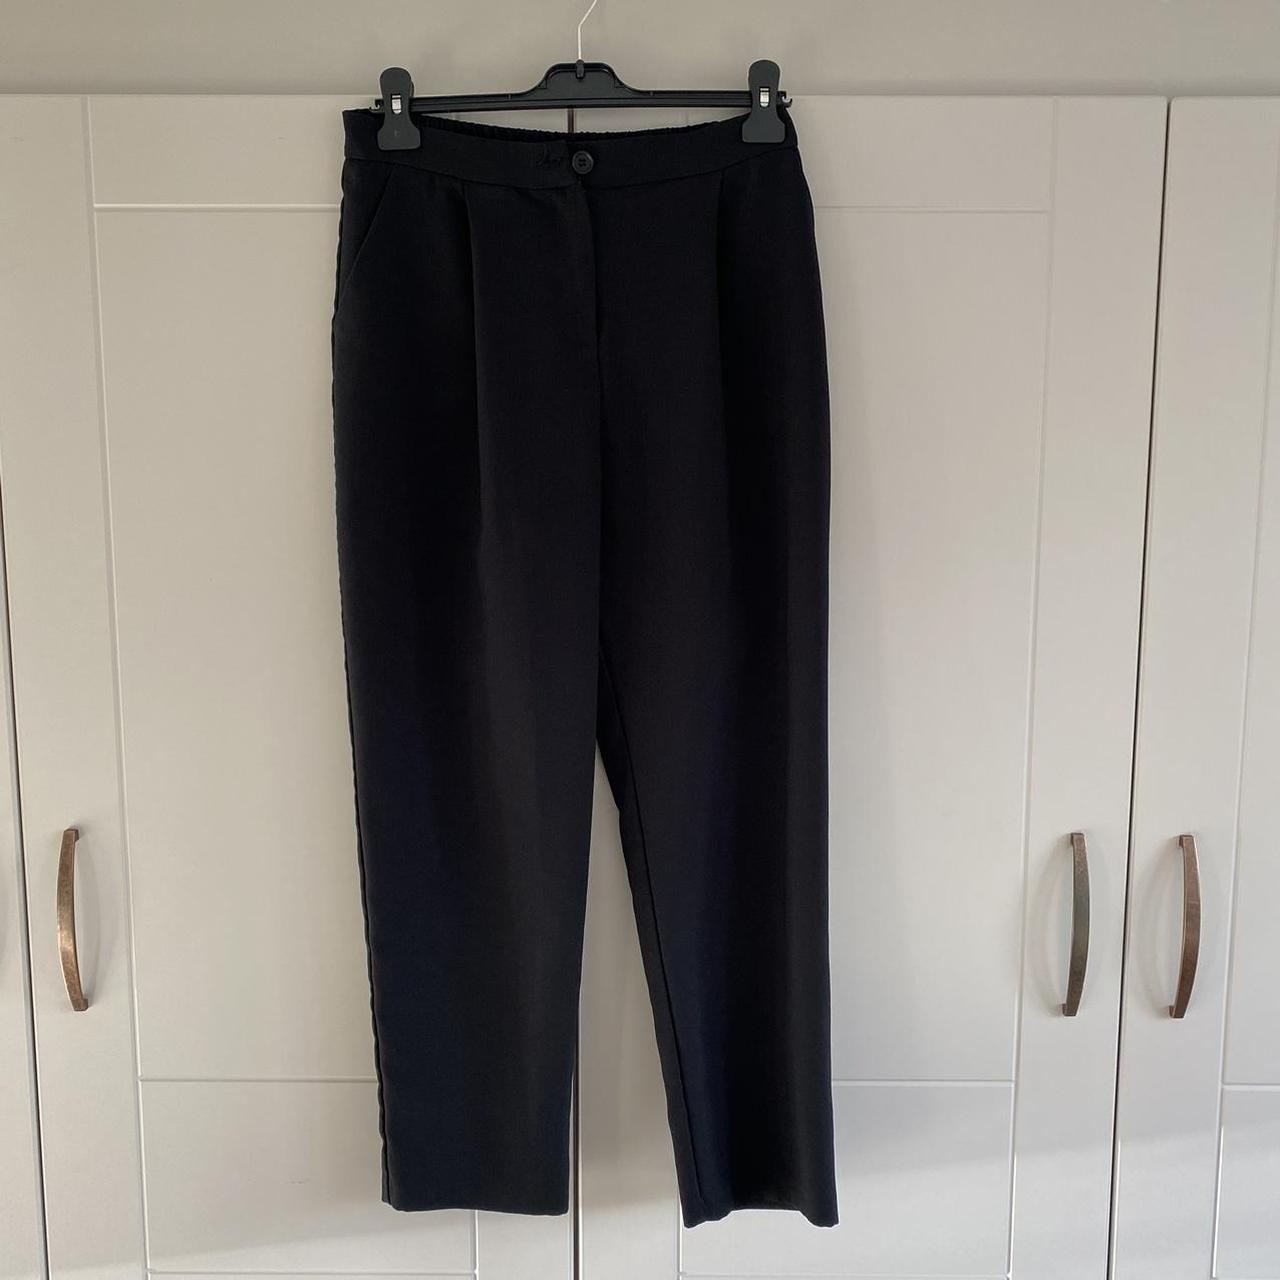 Black smart work trousers - tapered with elasticated... - Depop